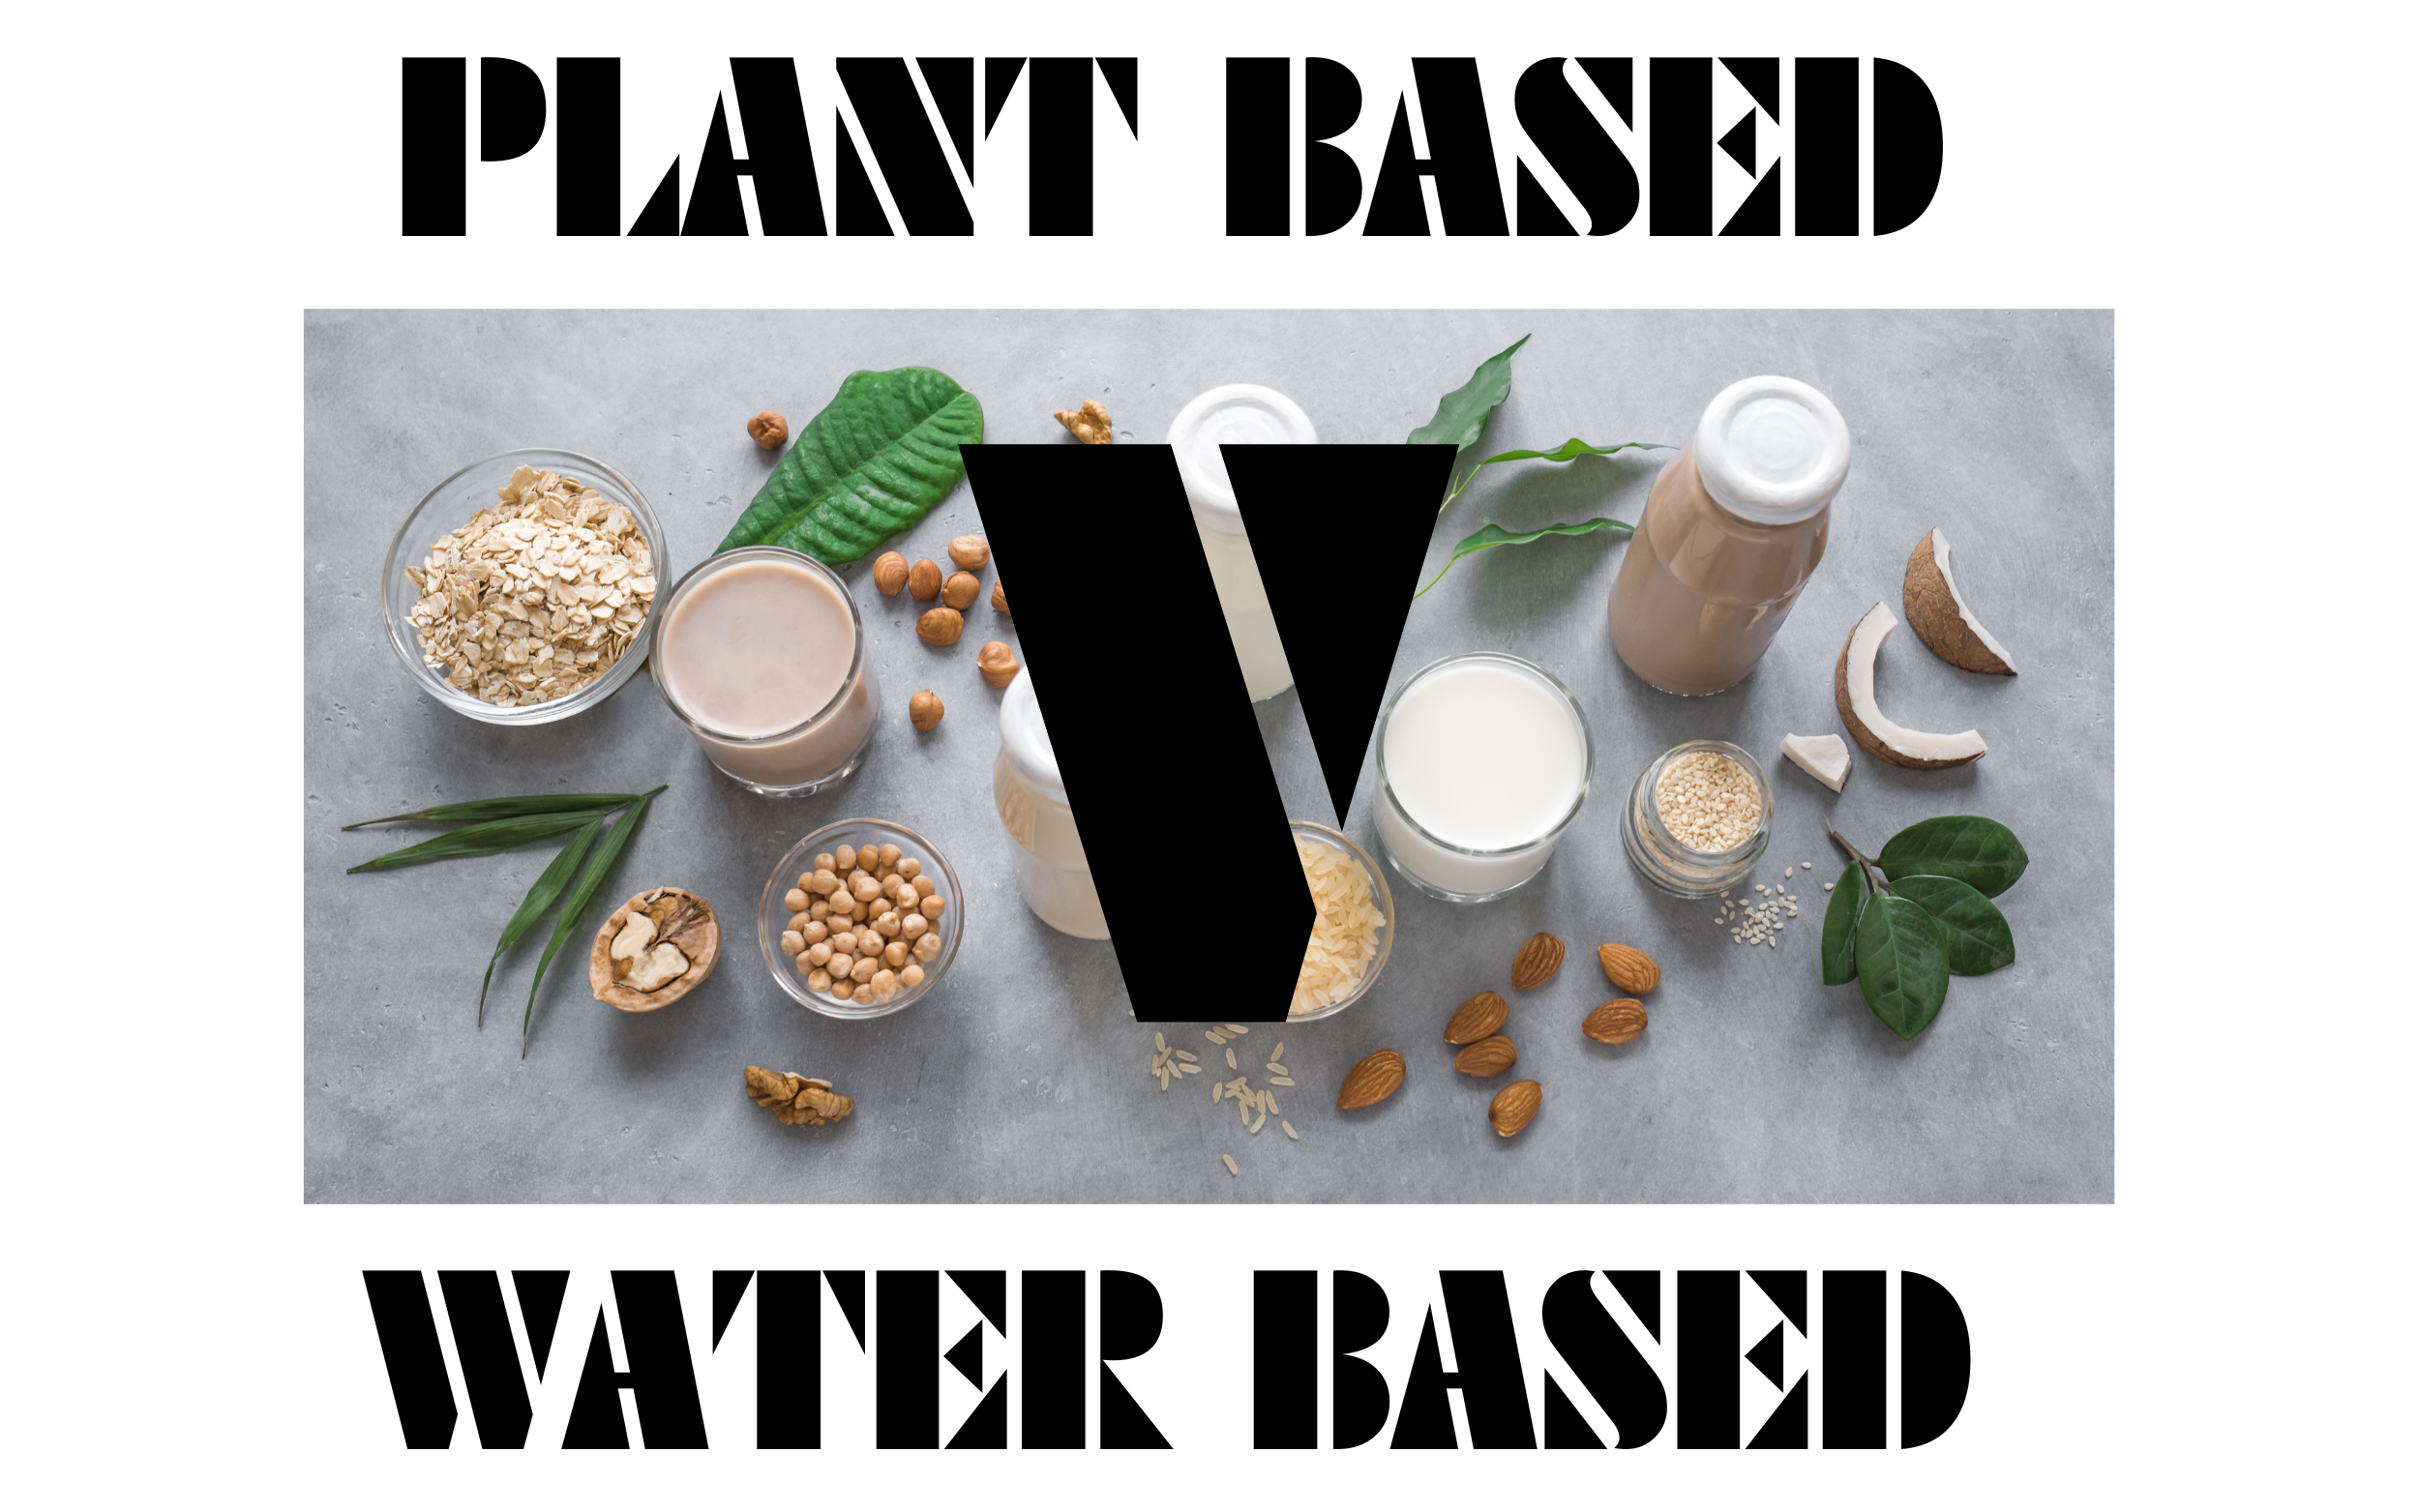 The differences between water-based chemicals and plant-based chemicals